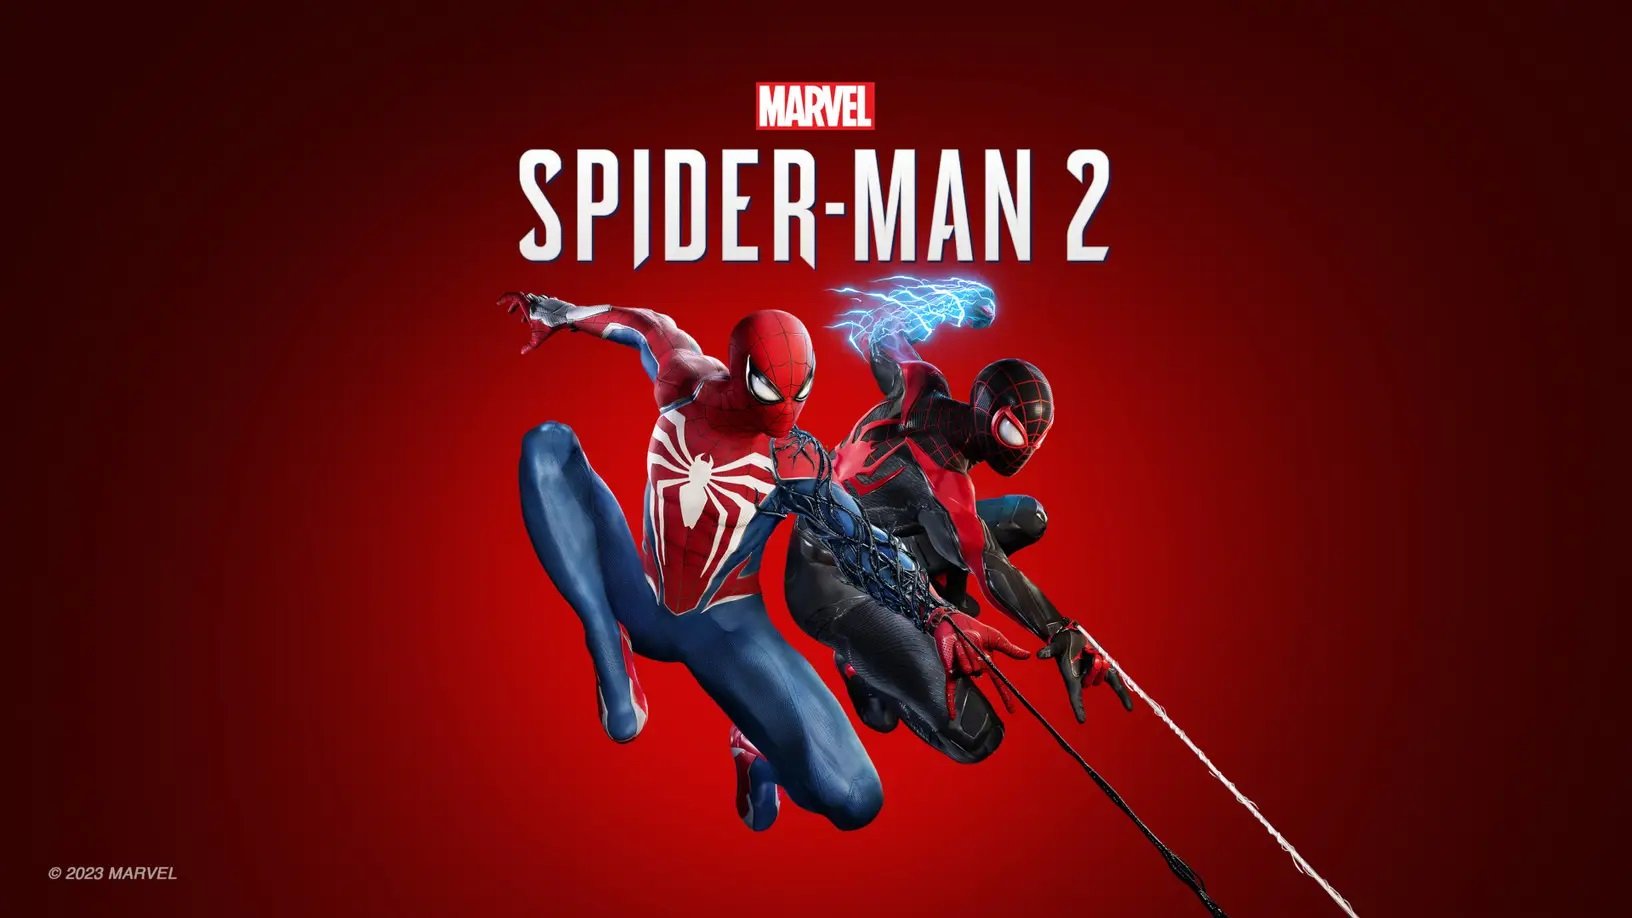 Marvel's Spider-Man 2 Update 1.003 Is Out, Here Are The Patch Notes